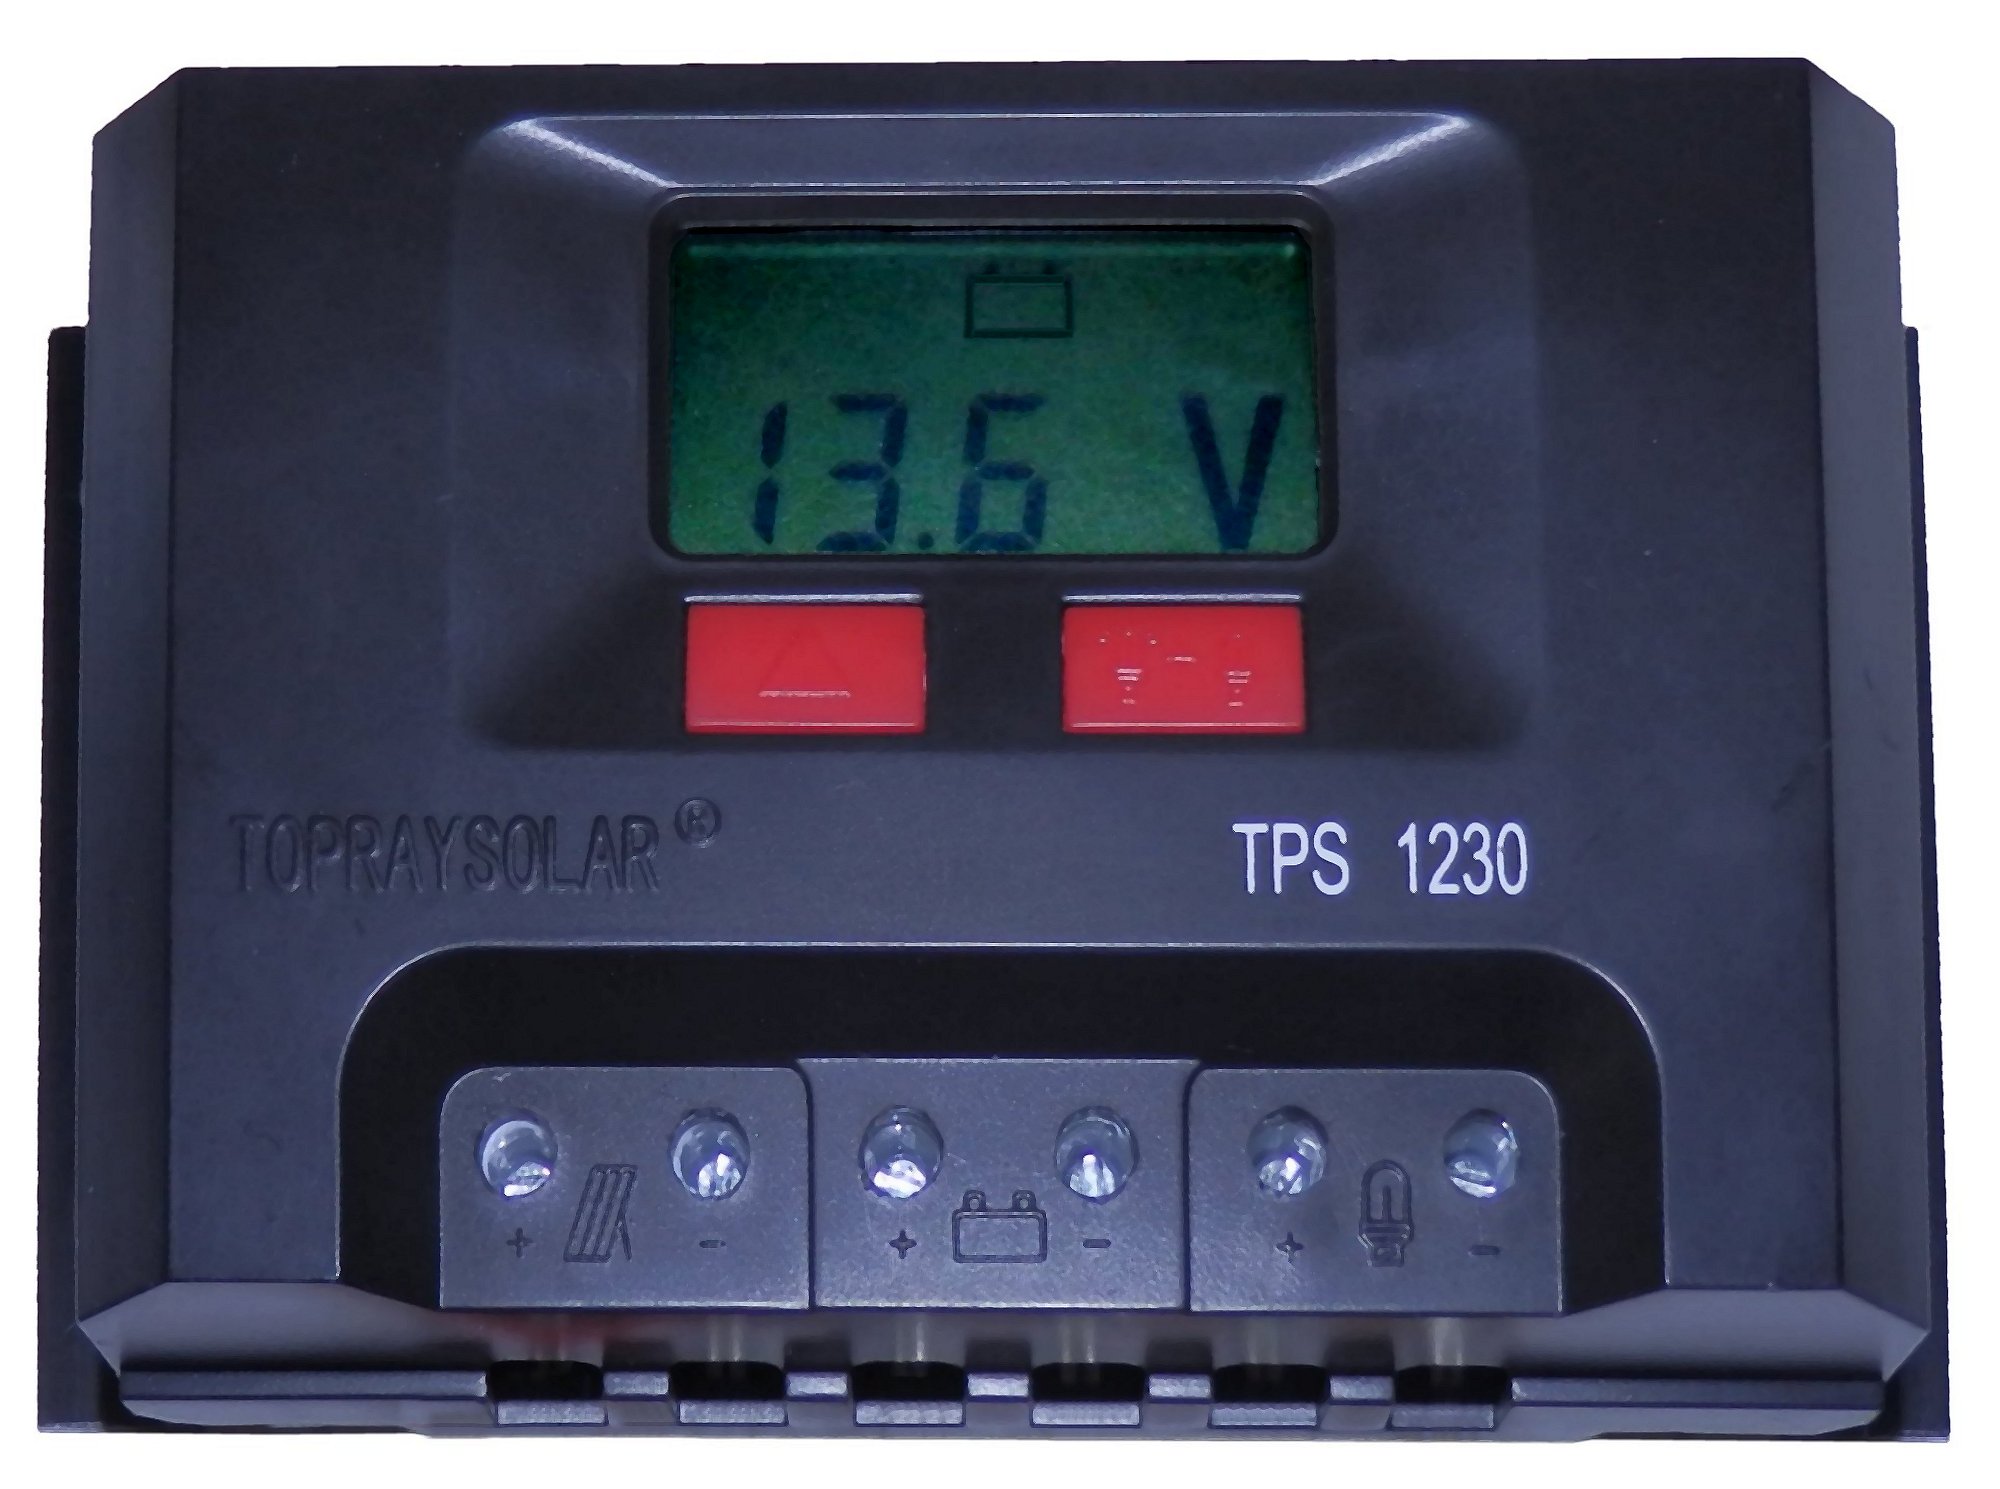 TPS 1230 Topray Solar 30Amp 12 Volt Solar Charge Controller With LCD